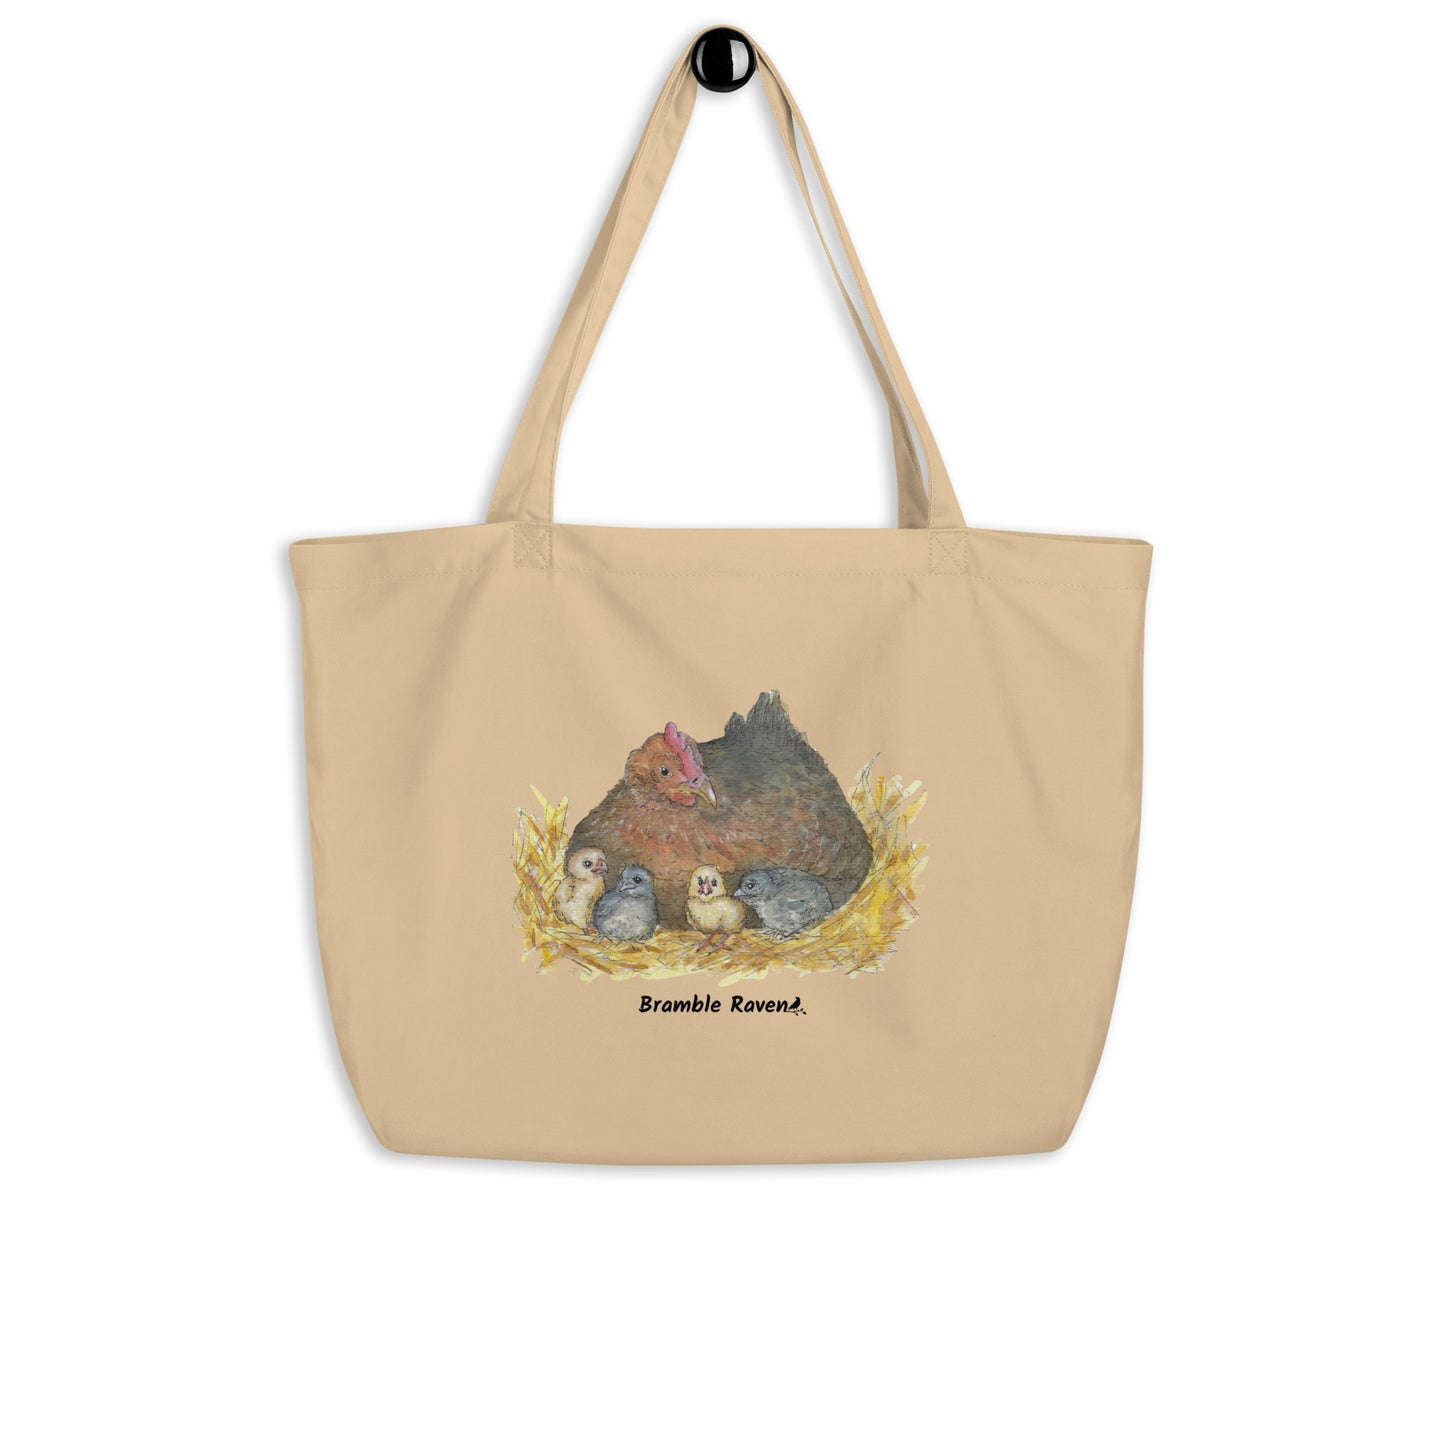 Large tan organic cotton tote bag. Has a watercolor mother hand and chicks print. Holds up to 30 pounds.